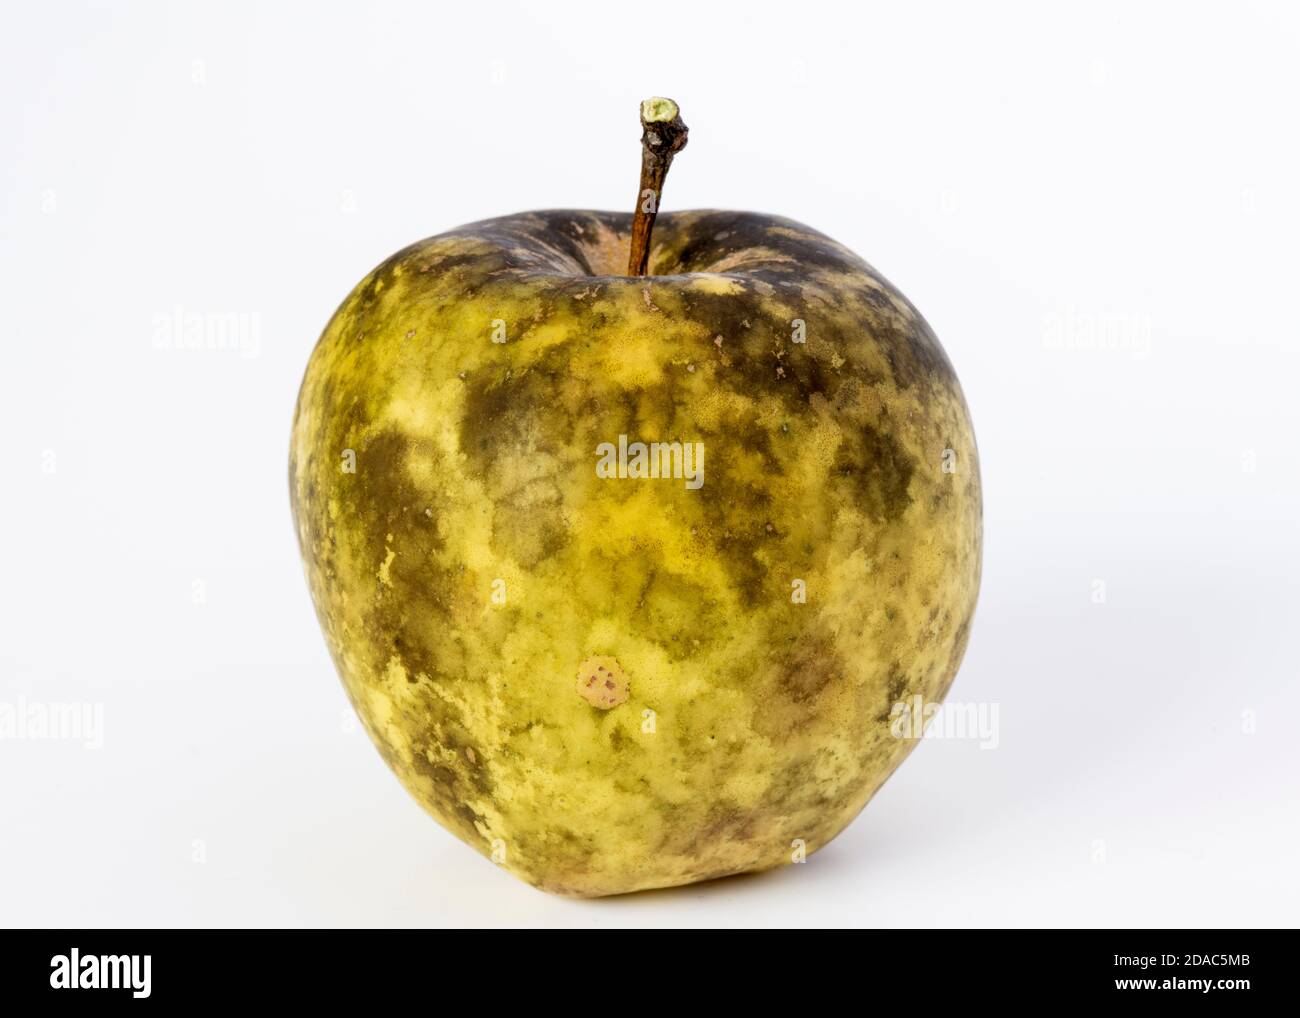 Unhealthy apple affected by Sooty Blotch fungus with blemishes and black specks on the skin Stock Photo